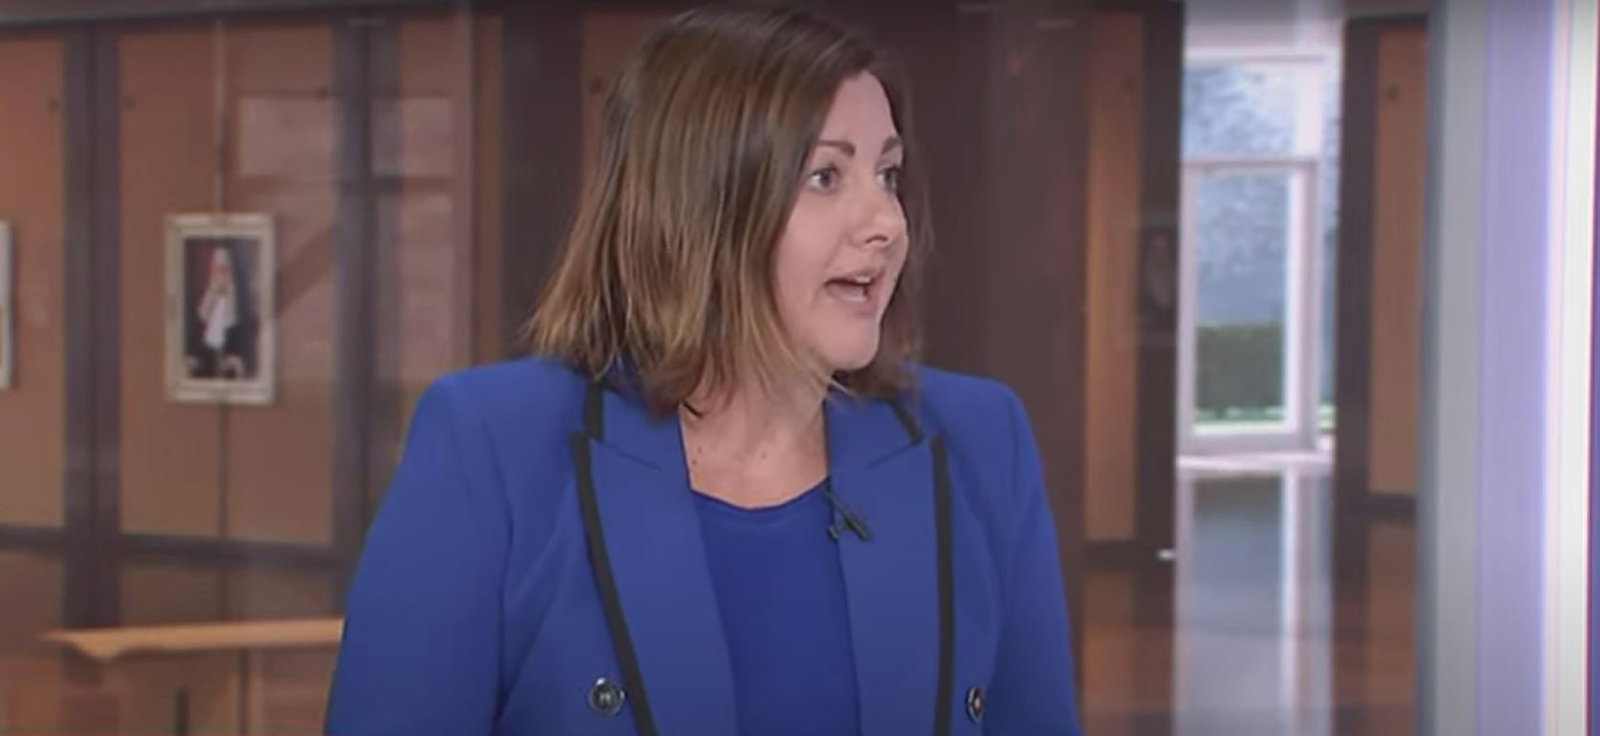 Kristy McBain in a blue blazer and shirt speaking.